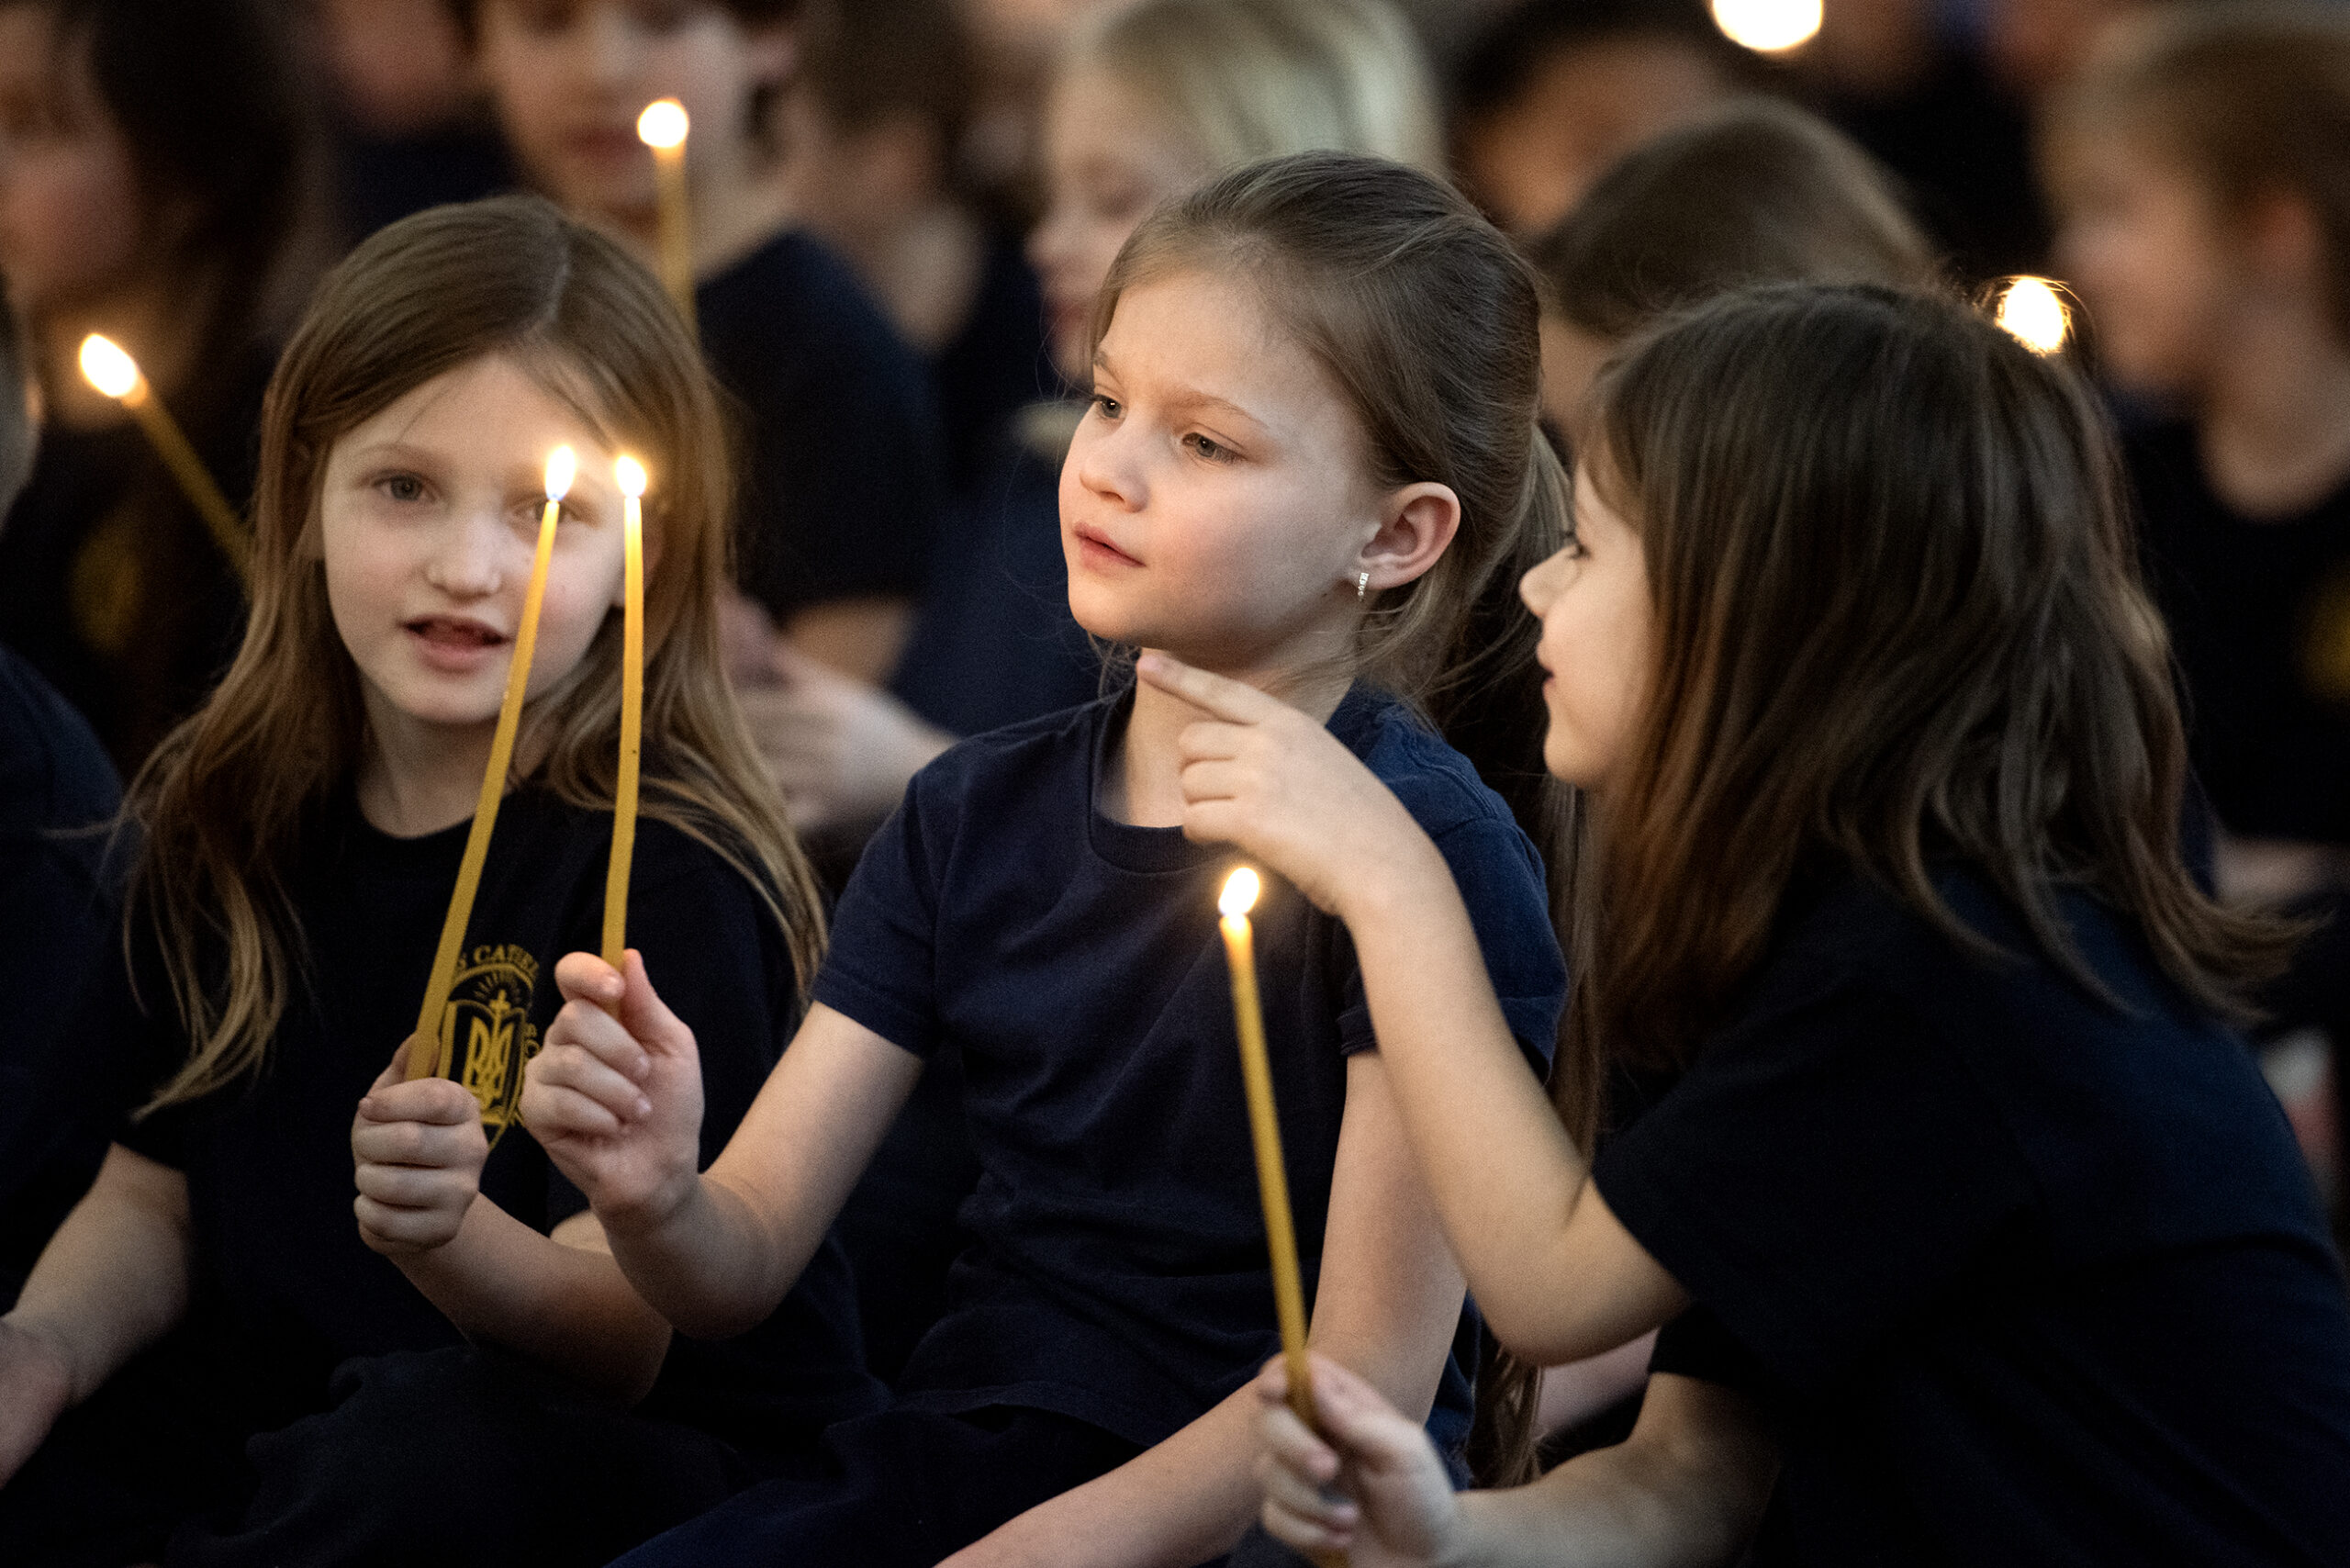 Children sit with lit candles